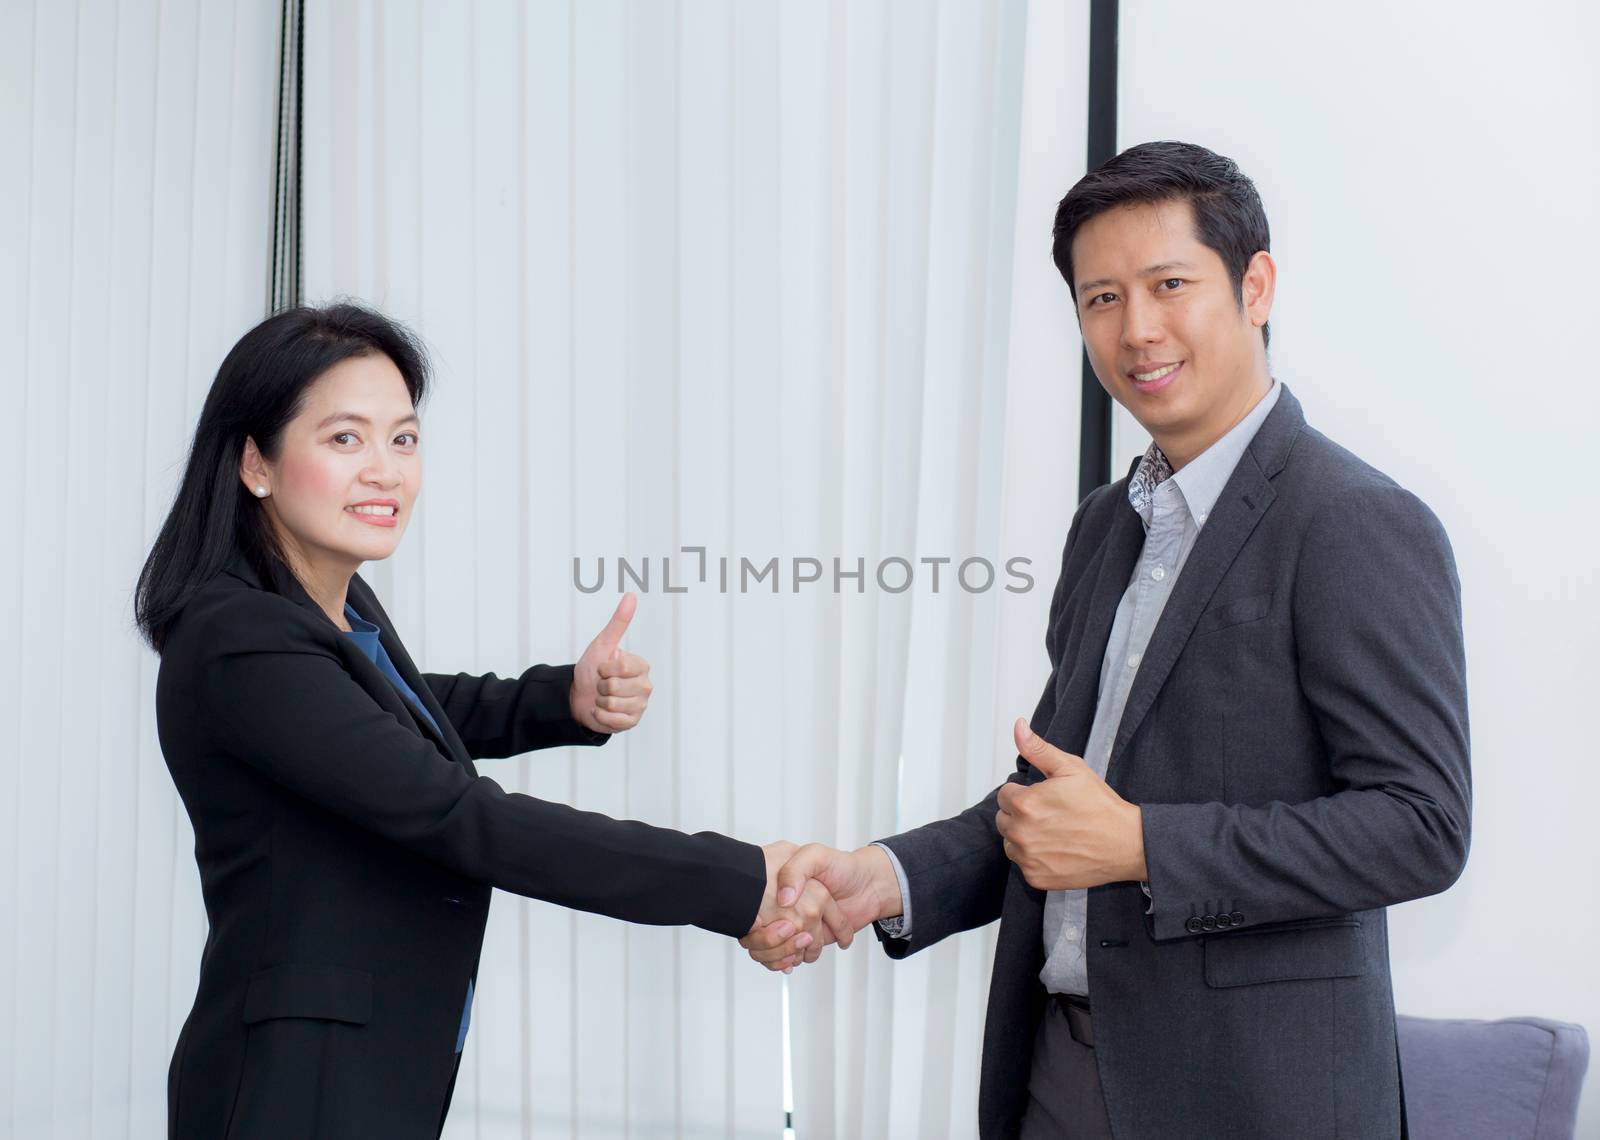 Handshake of businessman and businesswoman after successful business meeting.